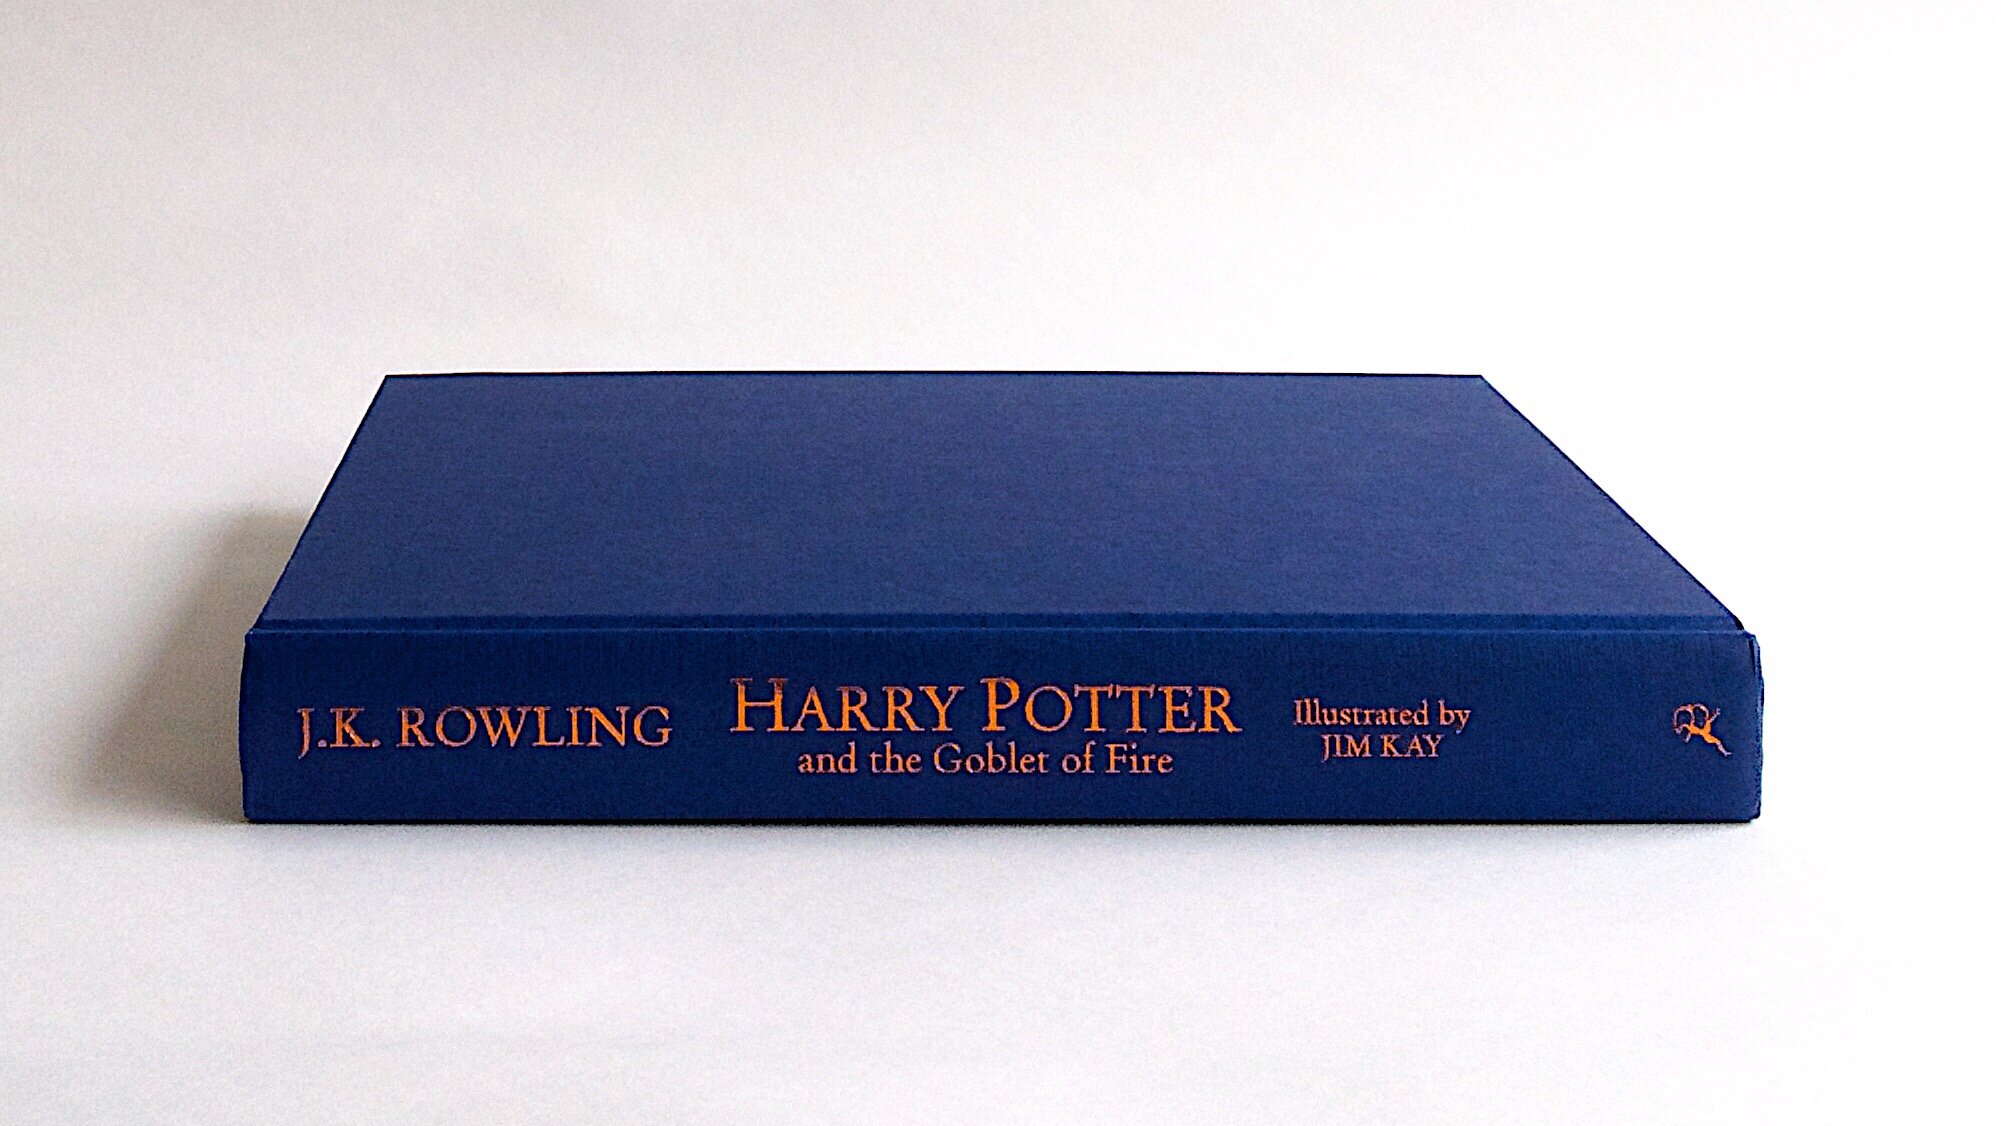 Harry Potter and the Goblet of Fire by J. K. Rowling, Jim Kay